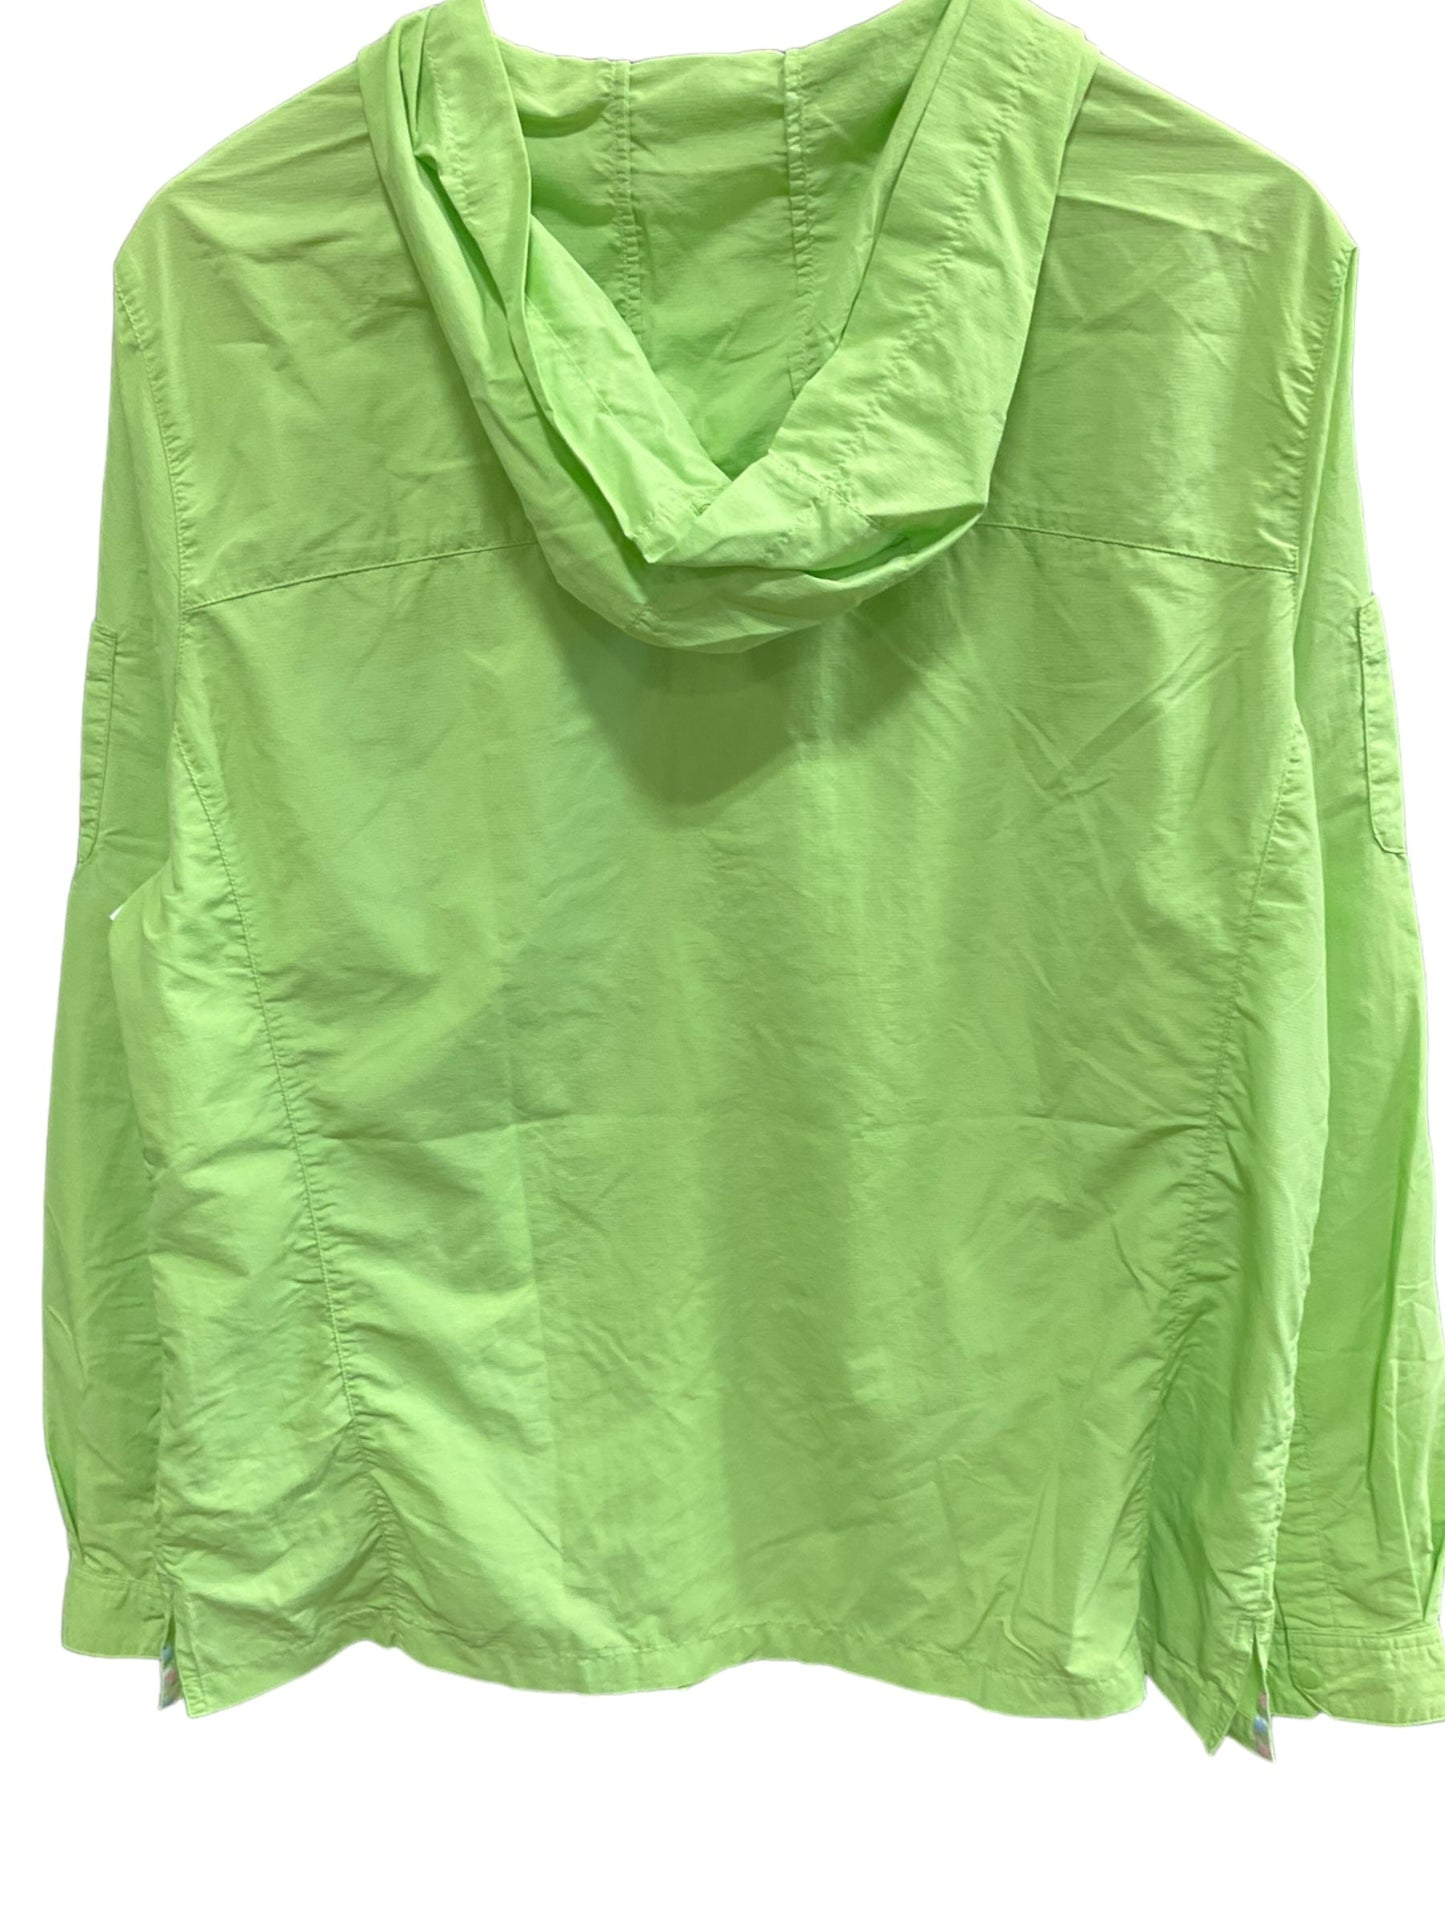 Green Athletic Top Long Sleeve Hoodie Clothes Mentor, Size Xl